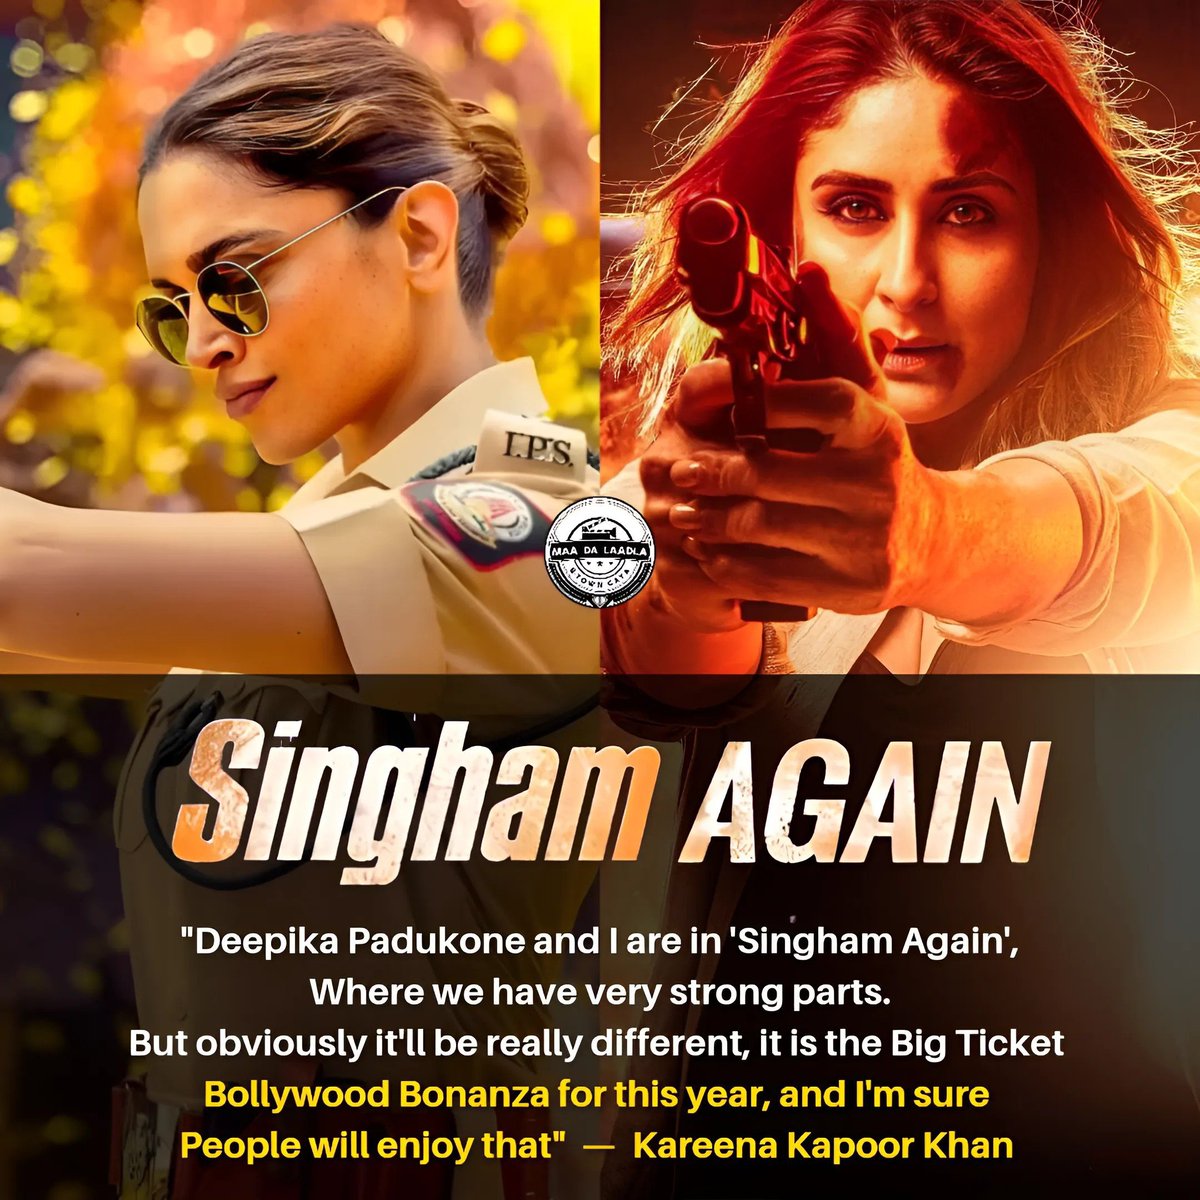 '#DeepikaPadukone and I  are in #SinghamAgain, where we have very strong parts. But obviously it’ll be really different, it is the big ticket #Bollywood bonanza for this year, and I’m sure people will enjoy that' says #KareenaKapoorKhan 🔥🔥🔥

#Singham3 #KareenaKapoor #AjayDevgn…